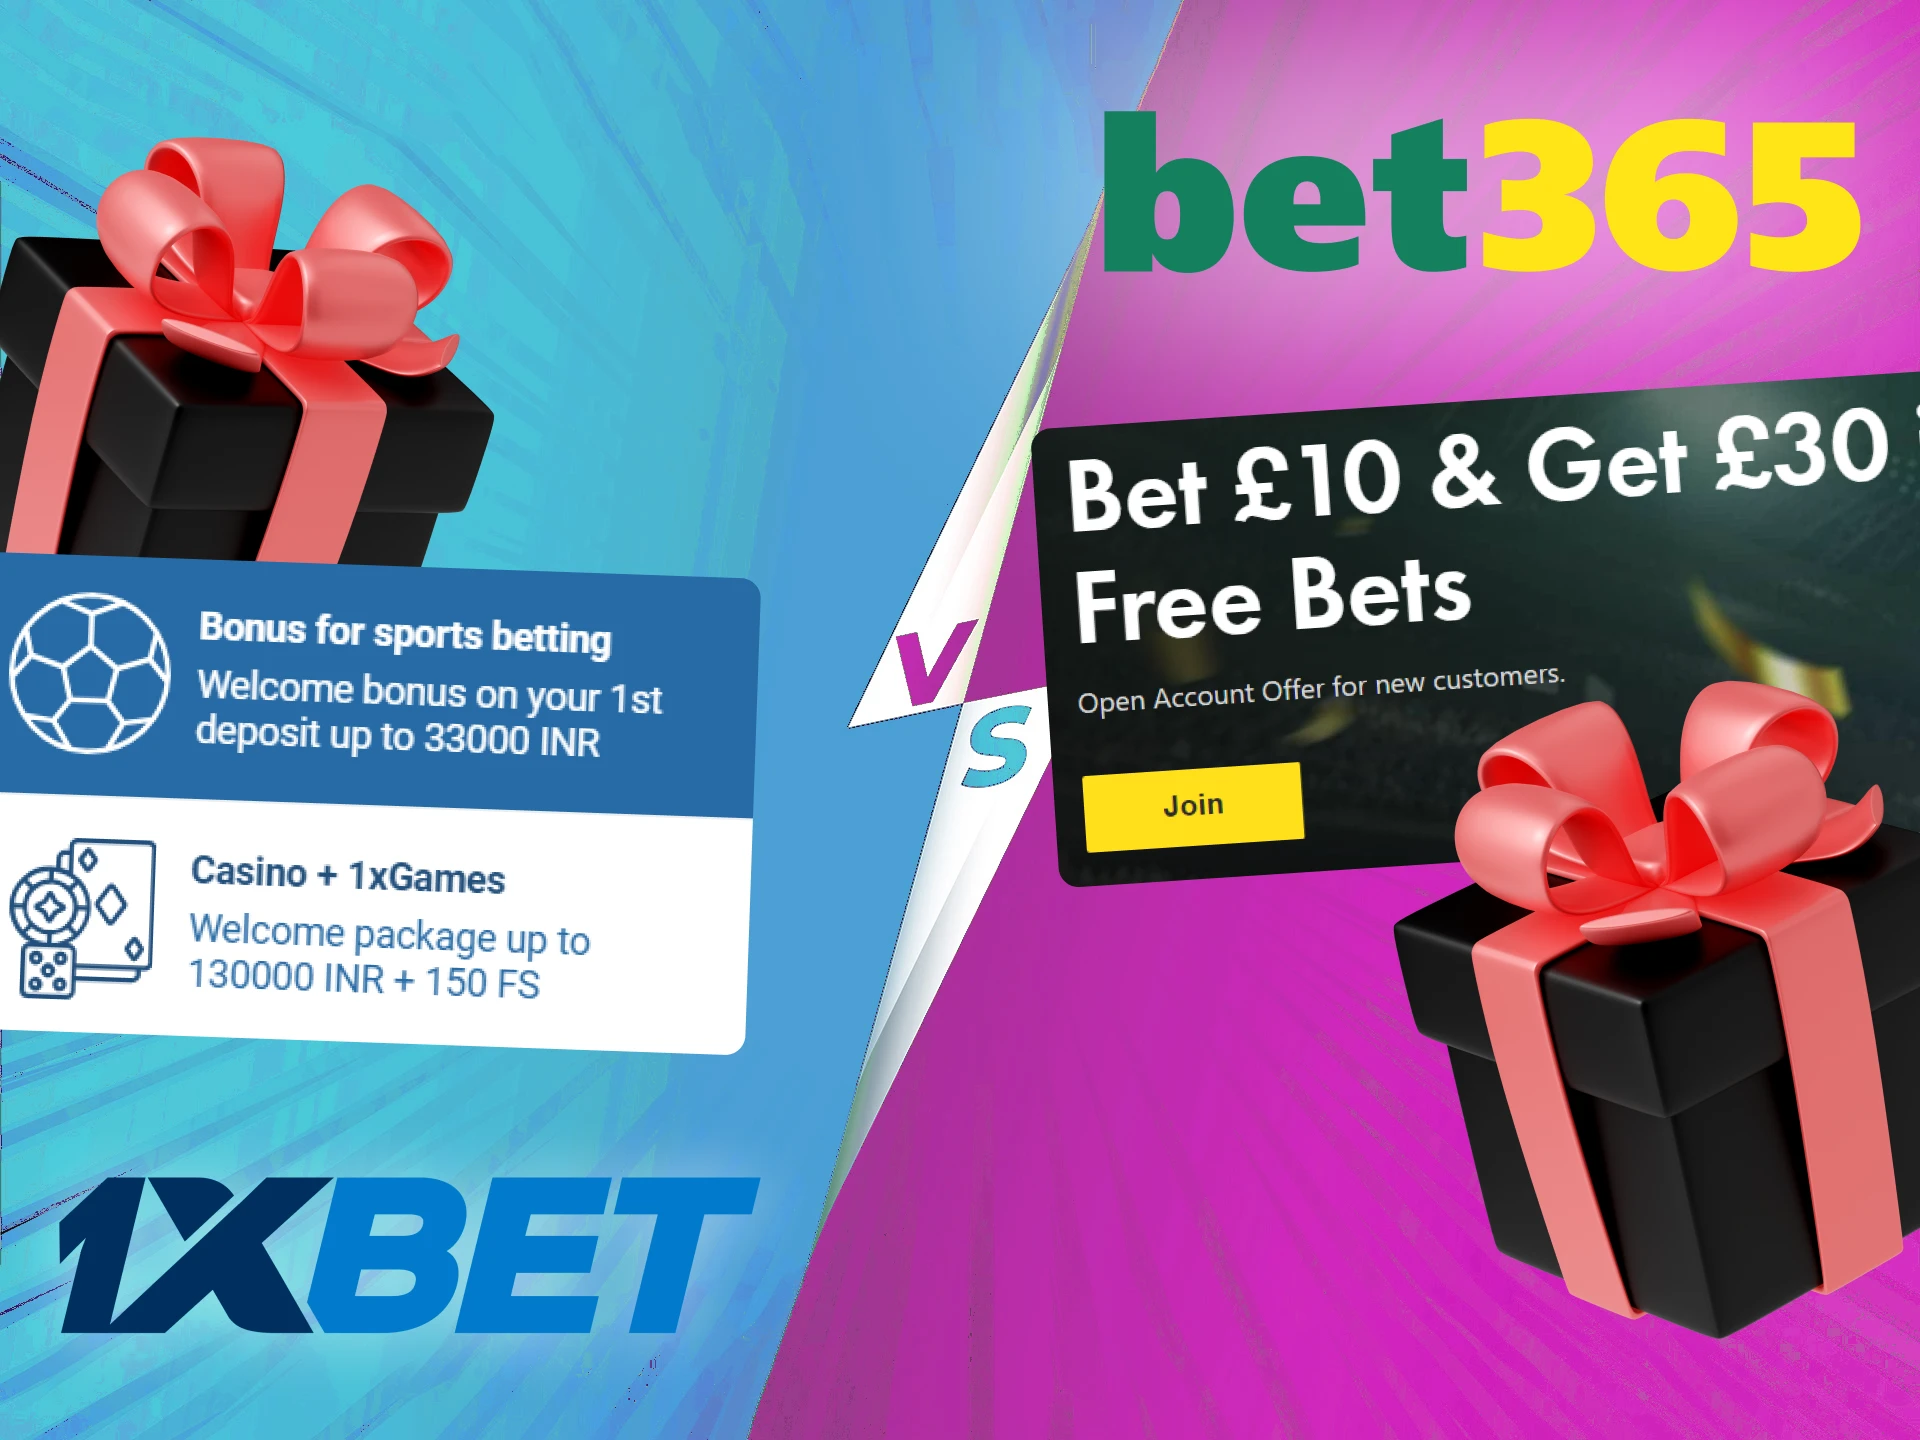 Decide which 1xbet or bet365 bonuses are right for you.